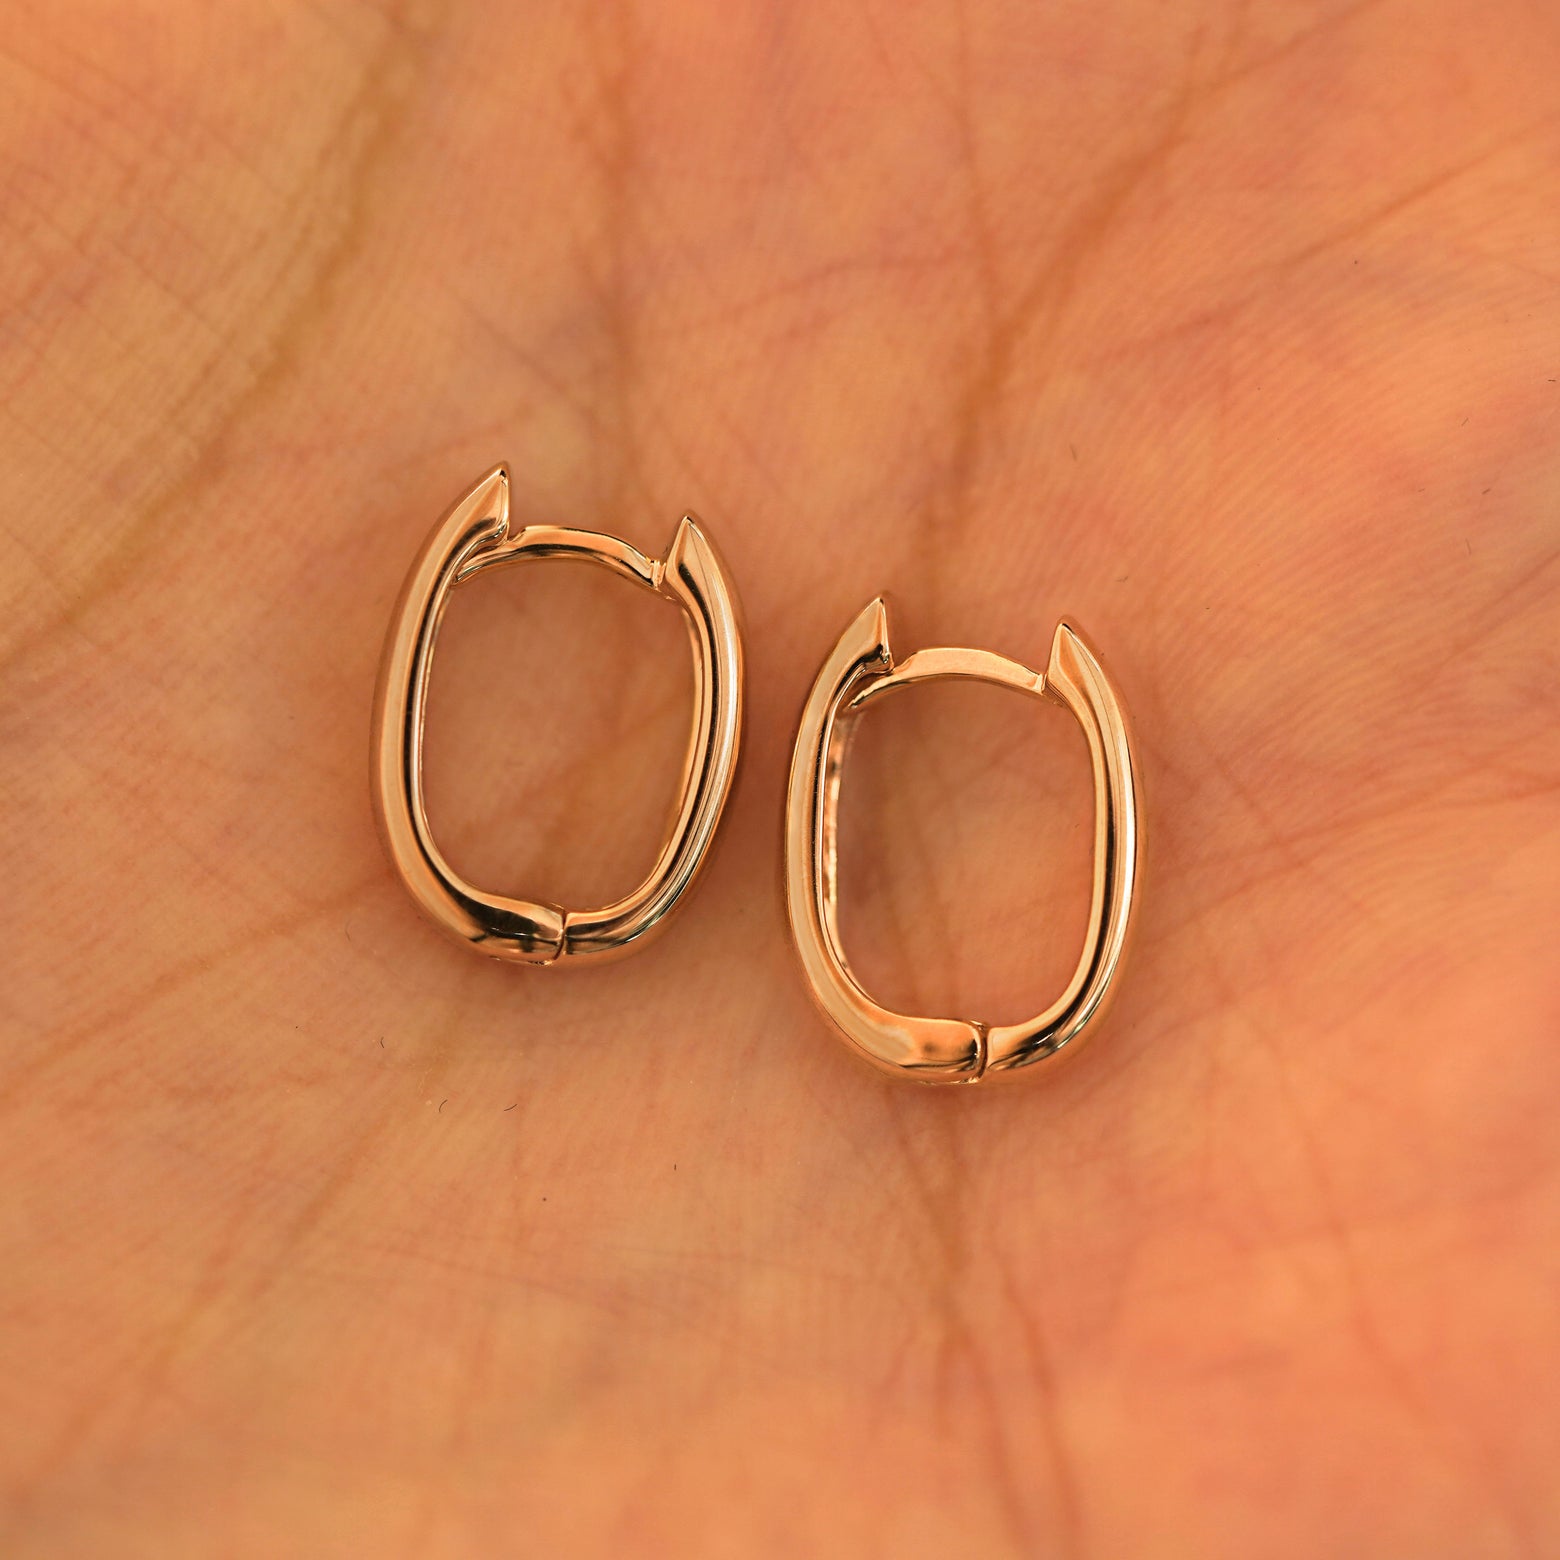 A pair of 14k rose gold Thick Oval Huggie Hoops resting in a model's palm